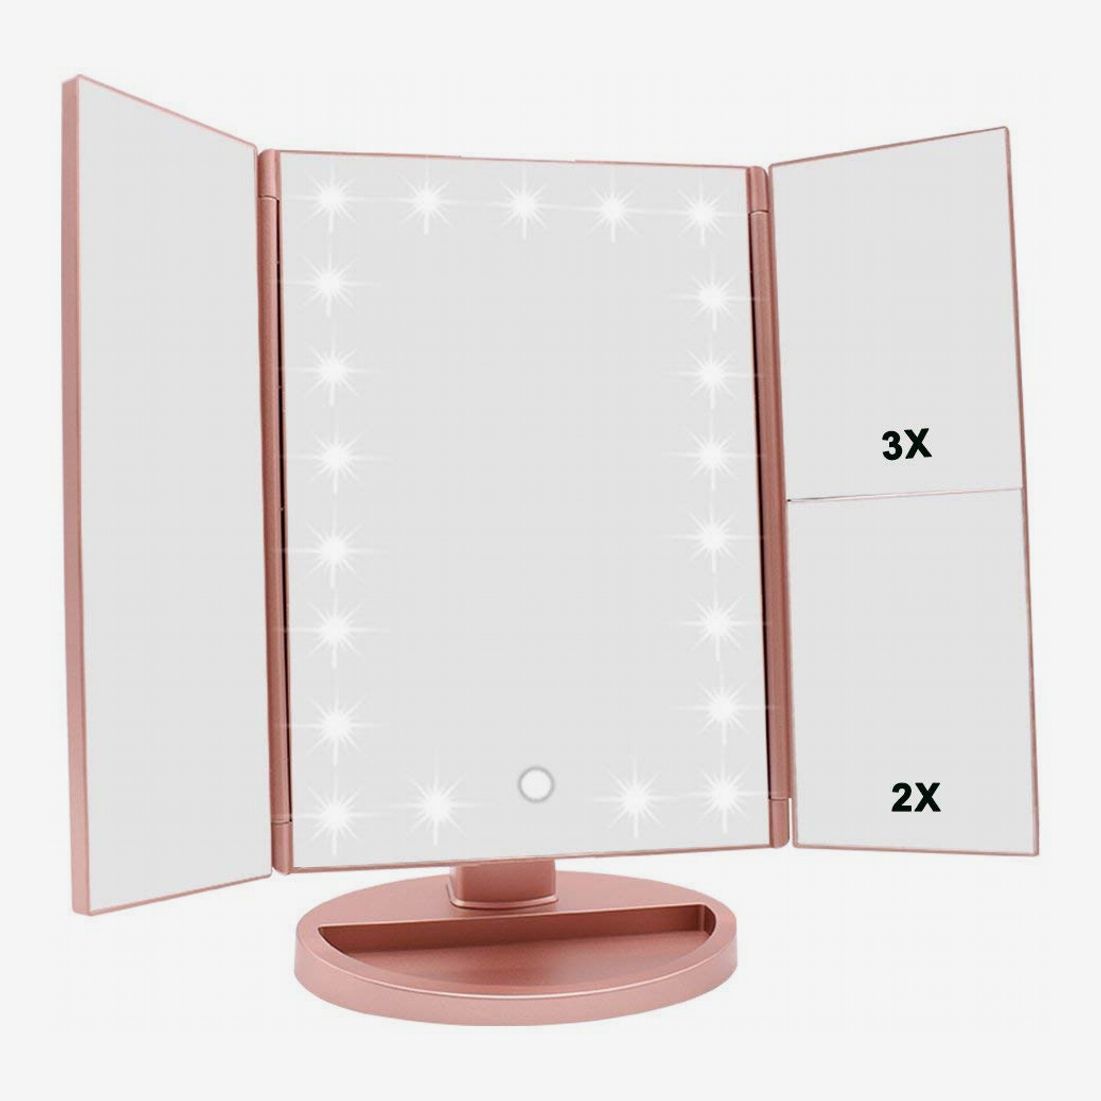 14 Best Lighted Makeup Mirrors 2021, Vanity Mirror Stand With Lights